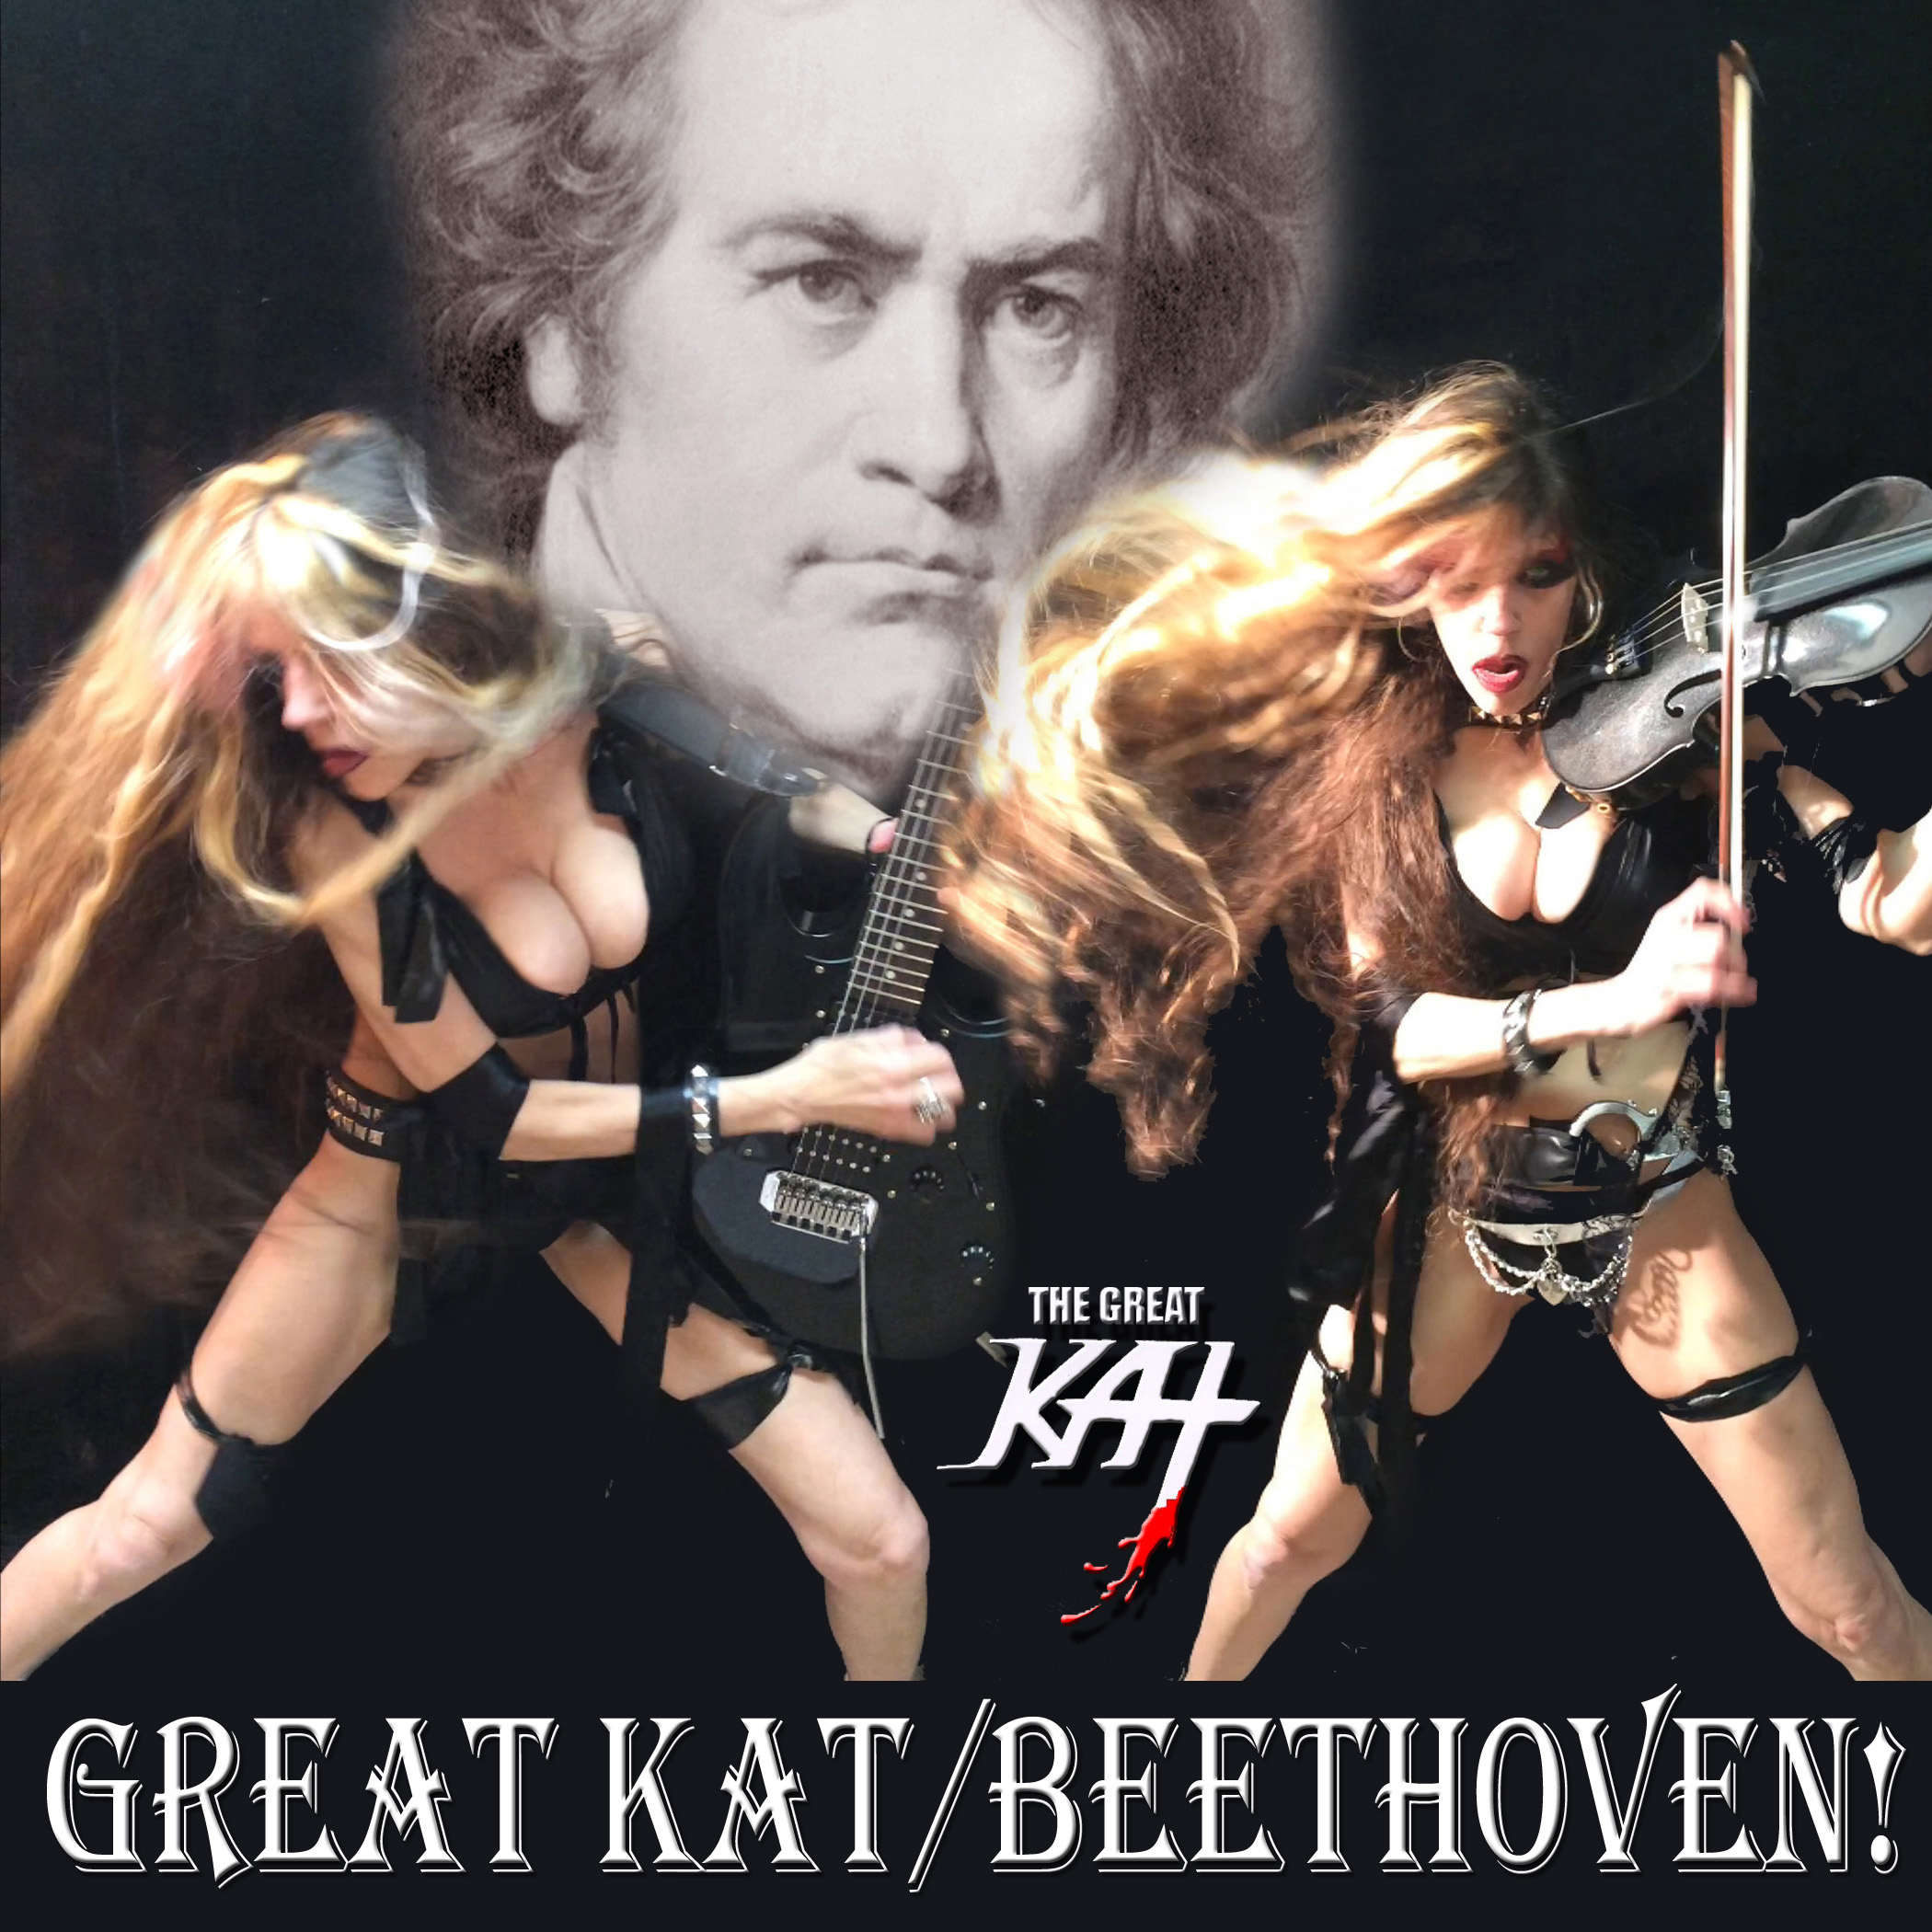 Ludwig Van Beethoven Biography The Greatest Composition In